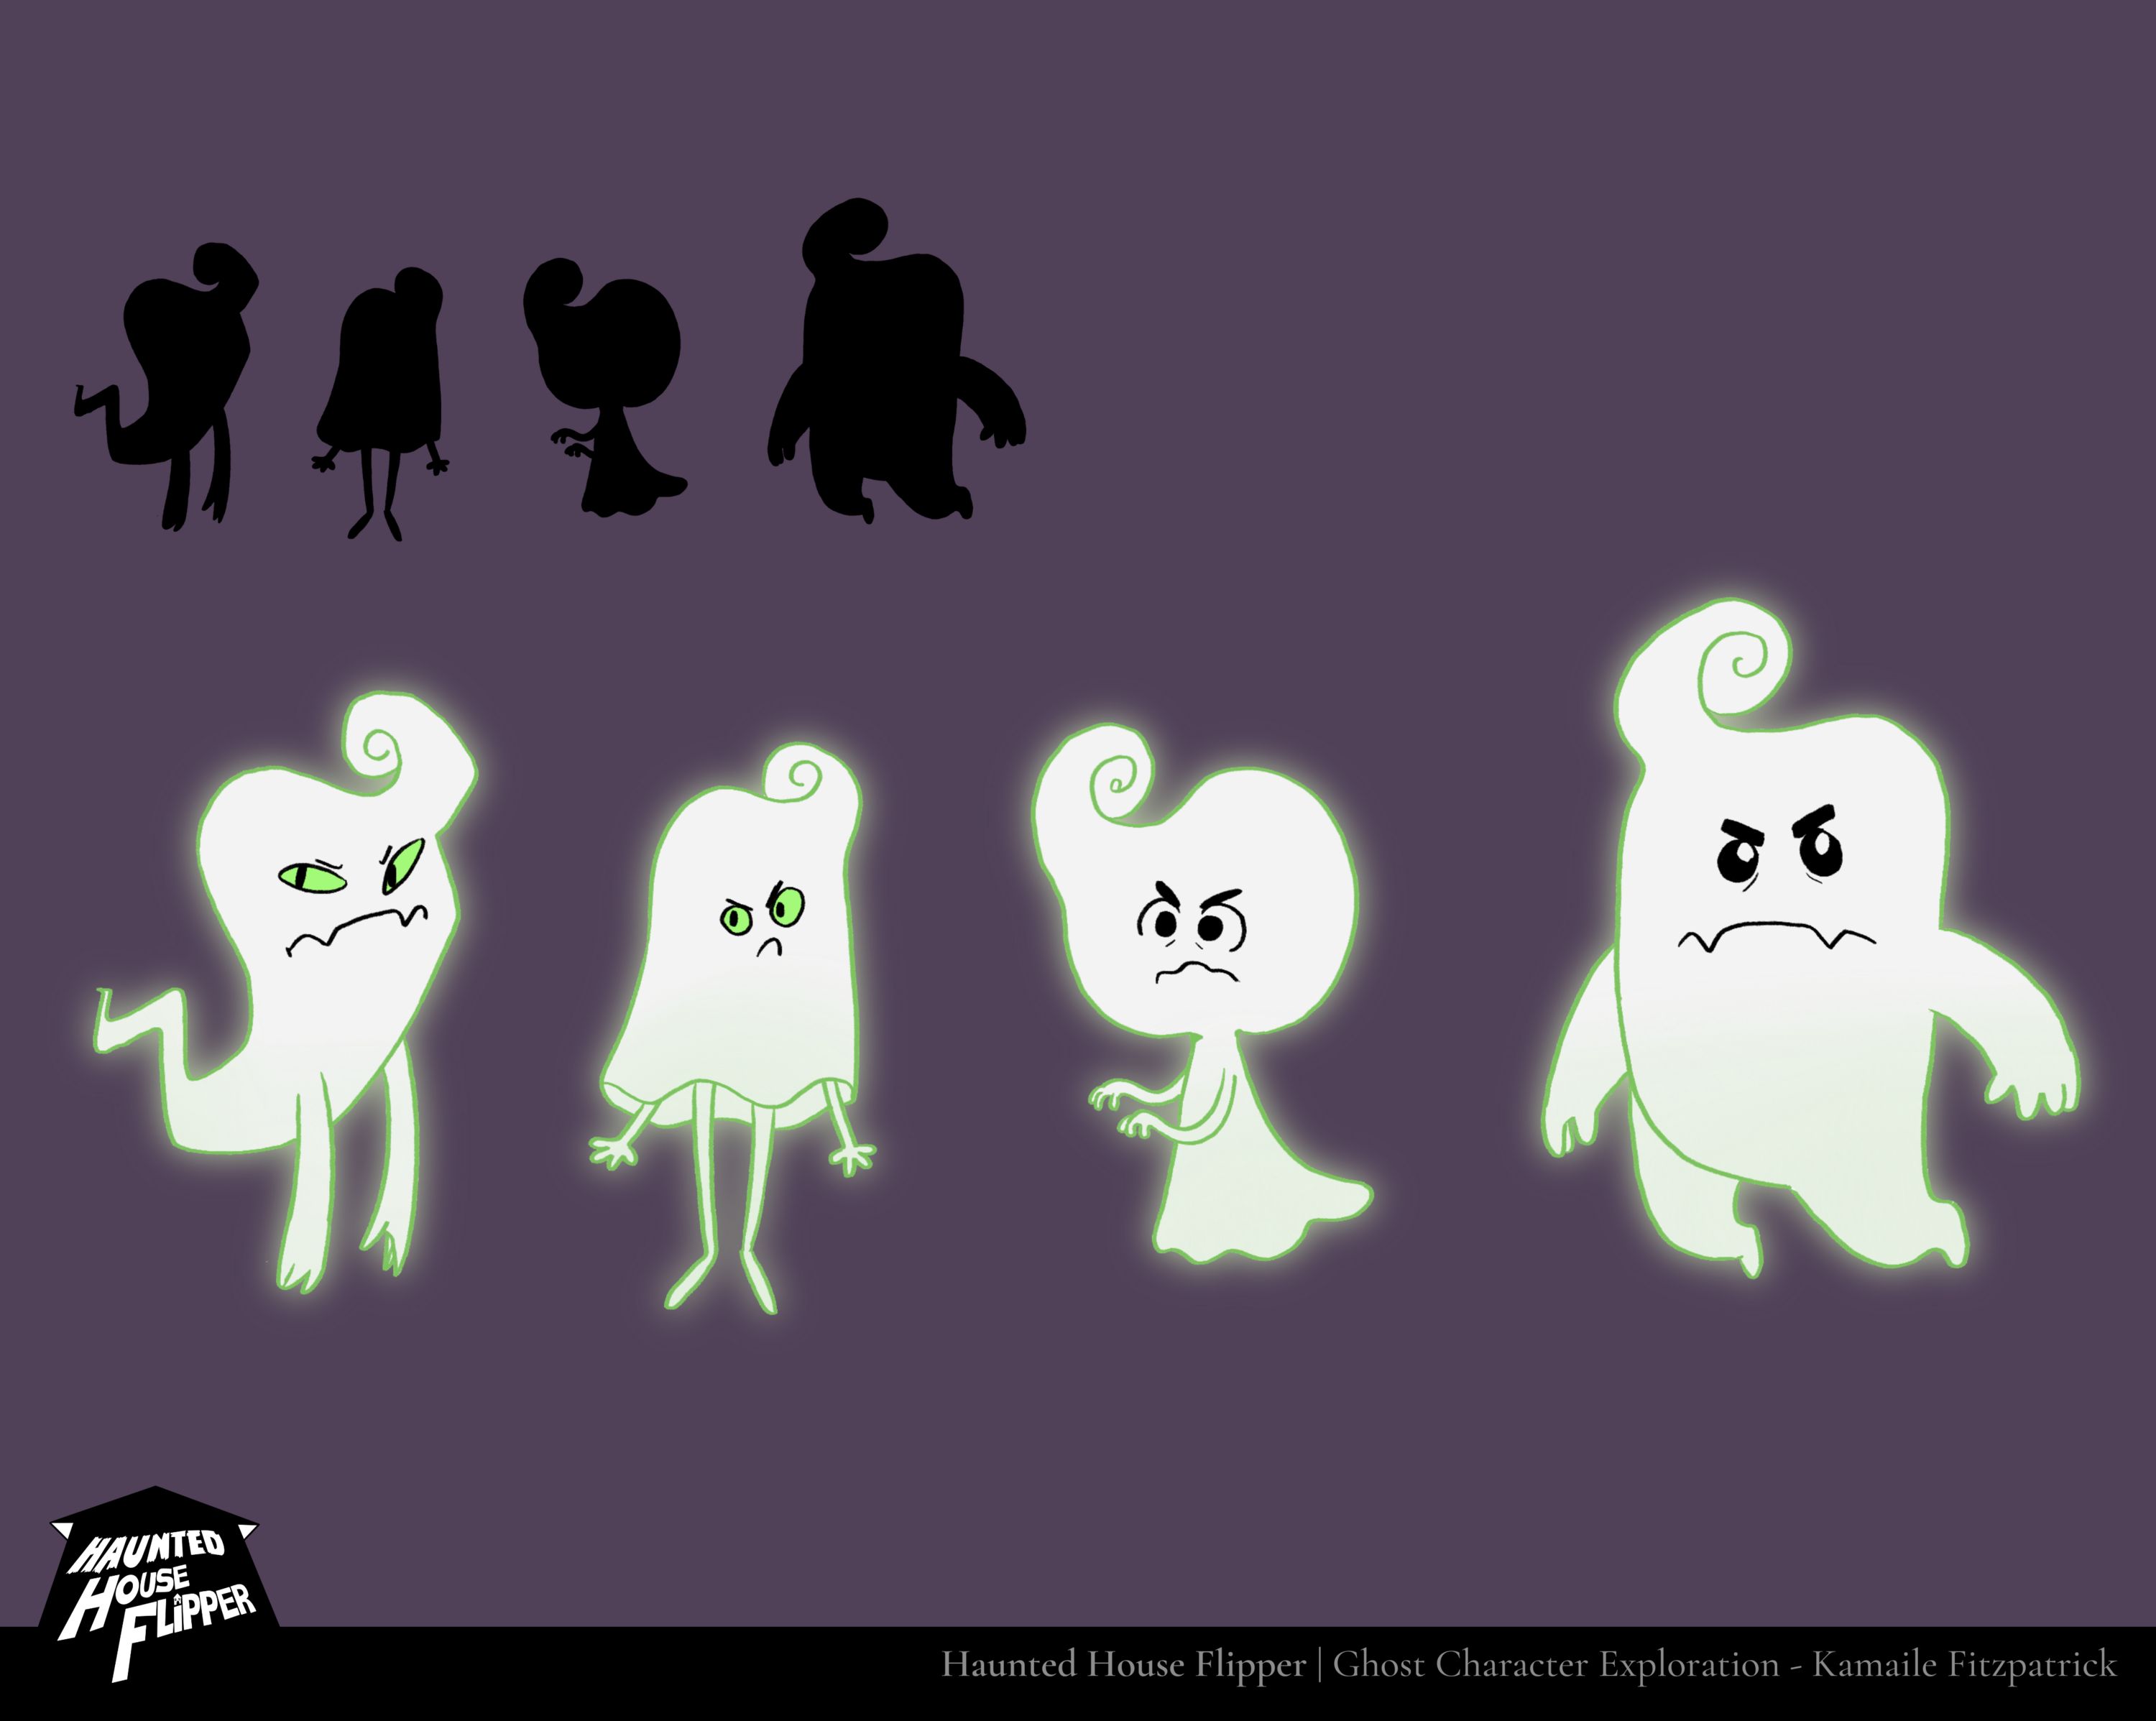 Ghost Character Exploration